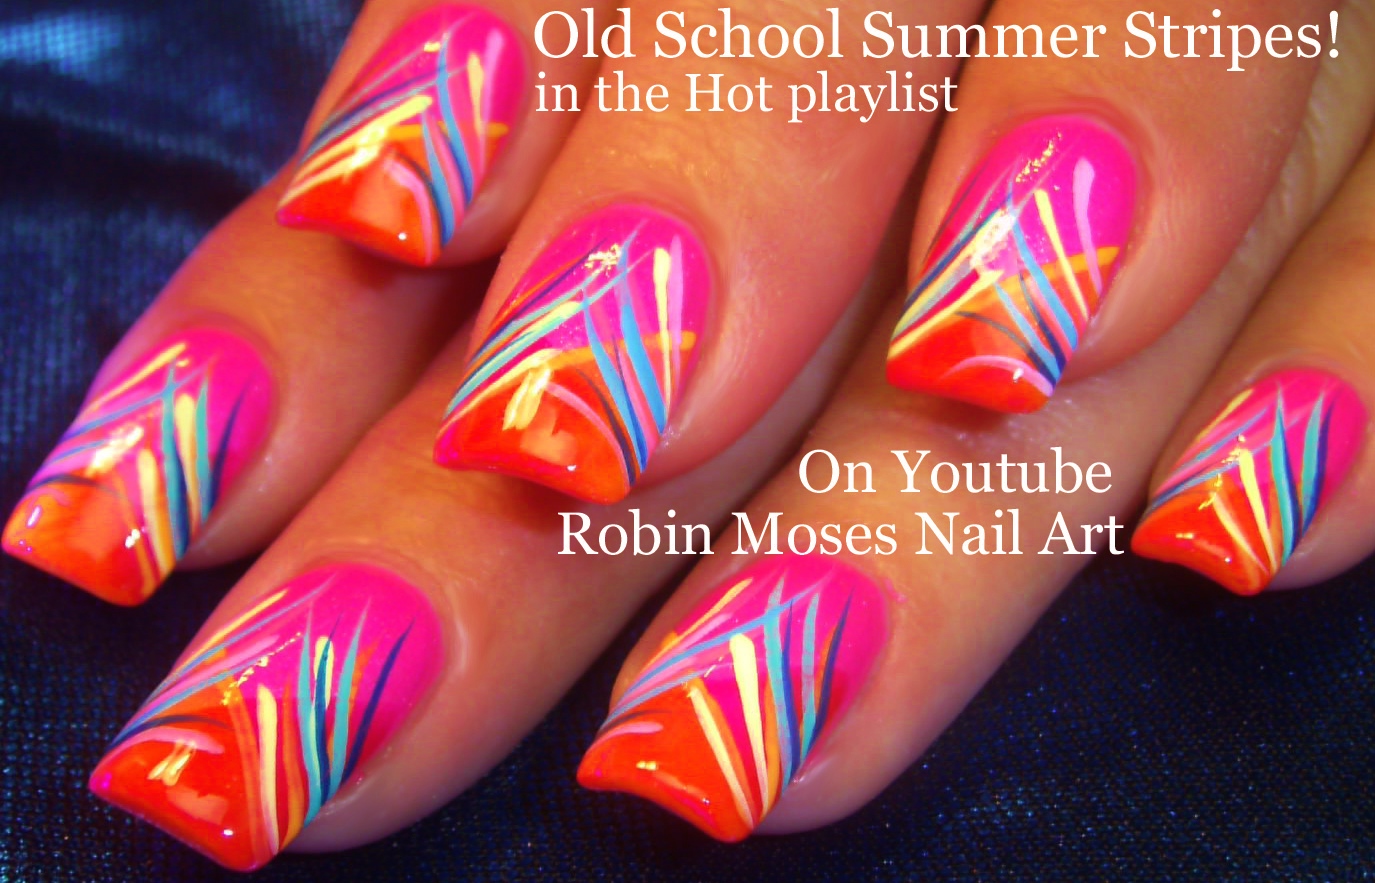 10. "Colorful Striped Nail Art Tutorial" - wide 1